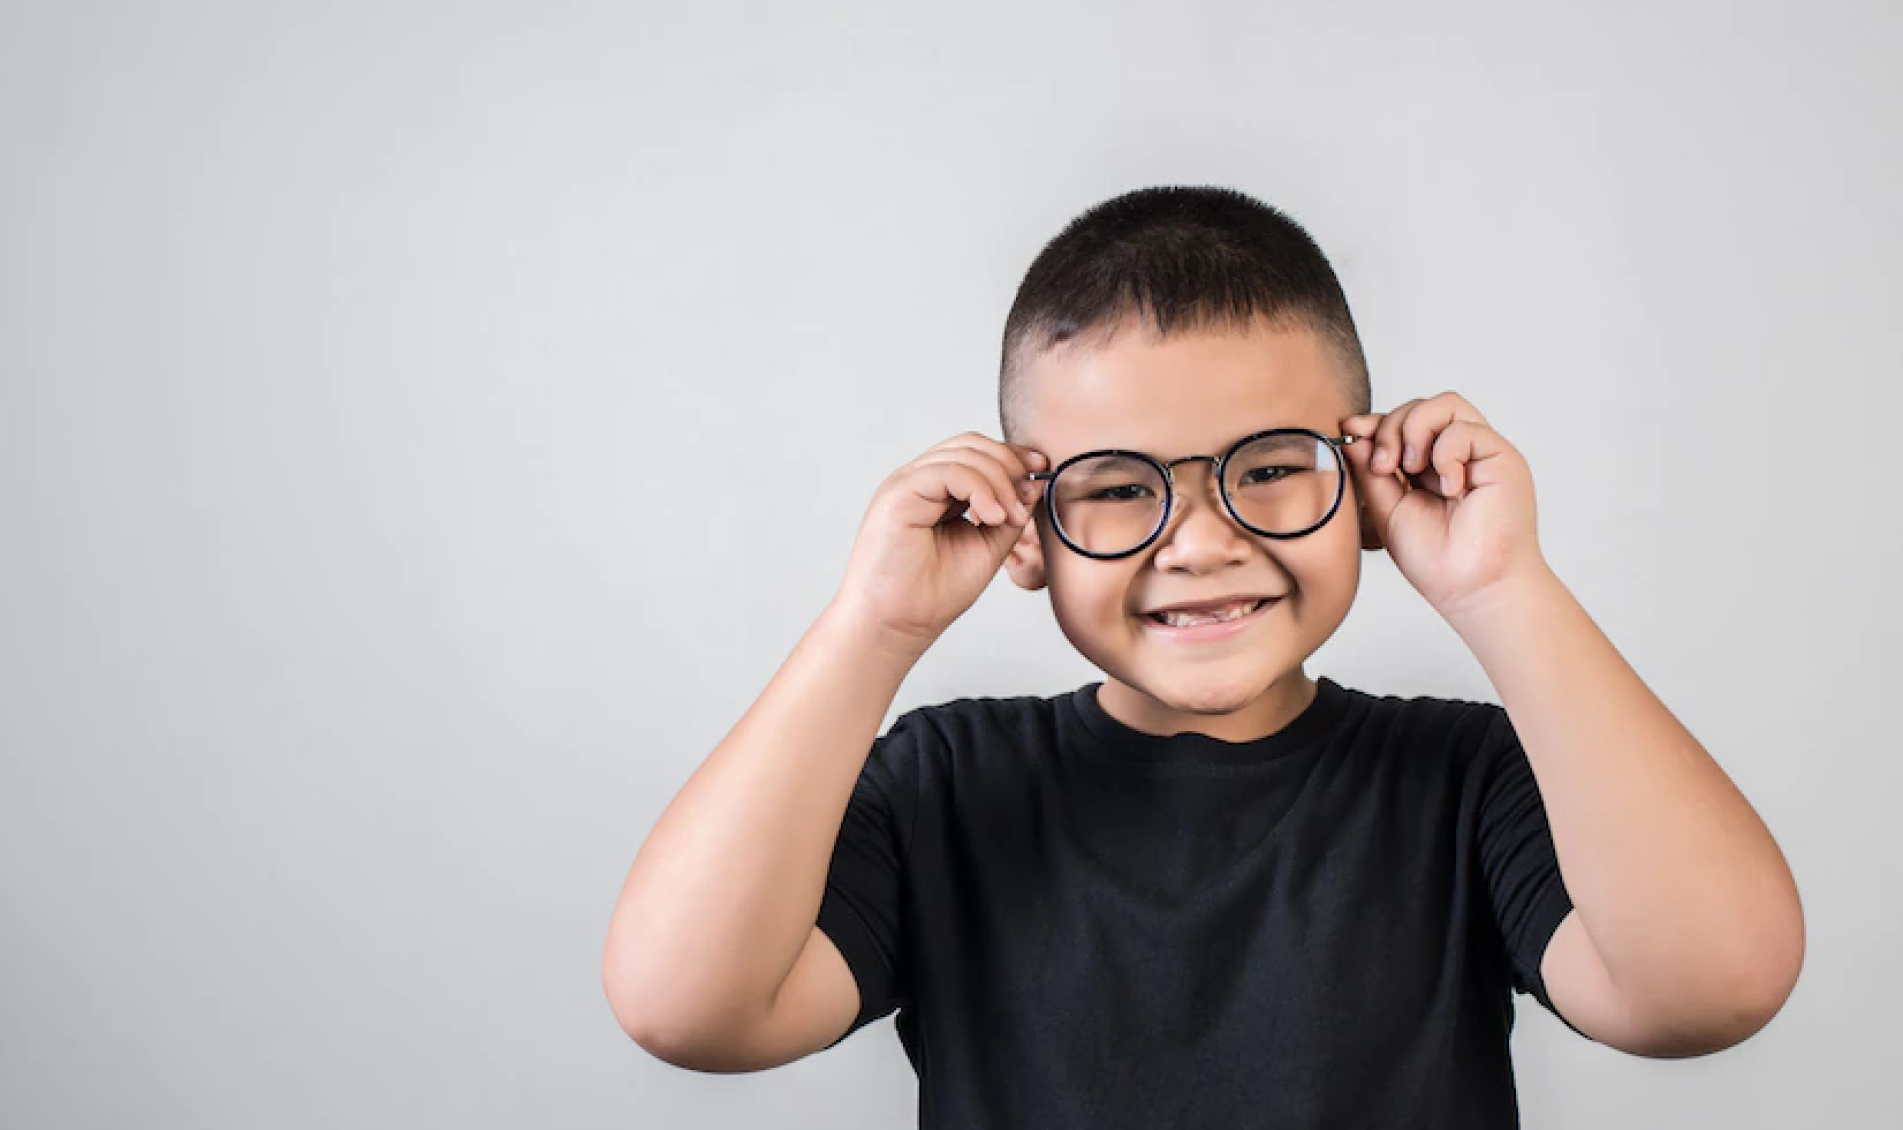 Protect your Child’s Eyes from Digital Eye Strain